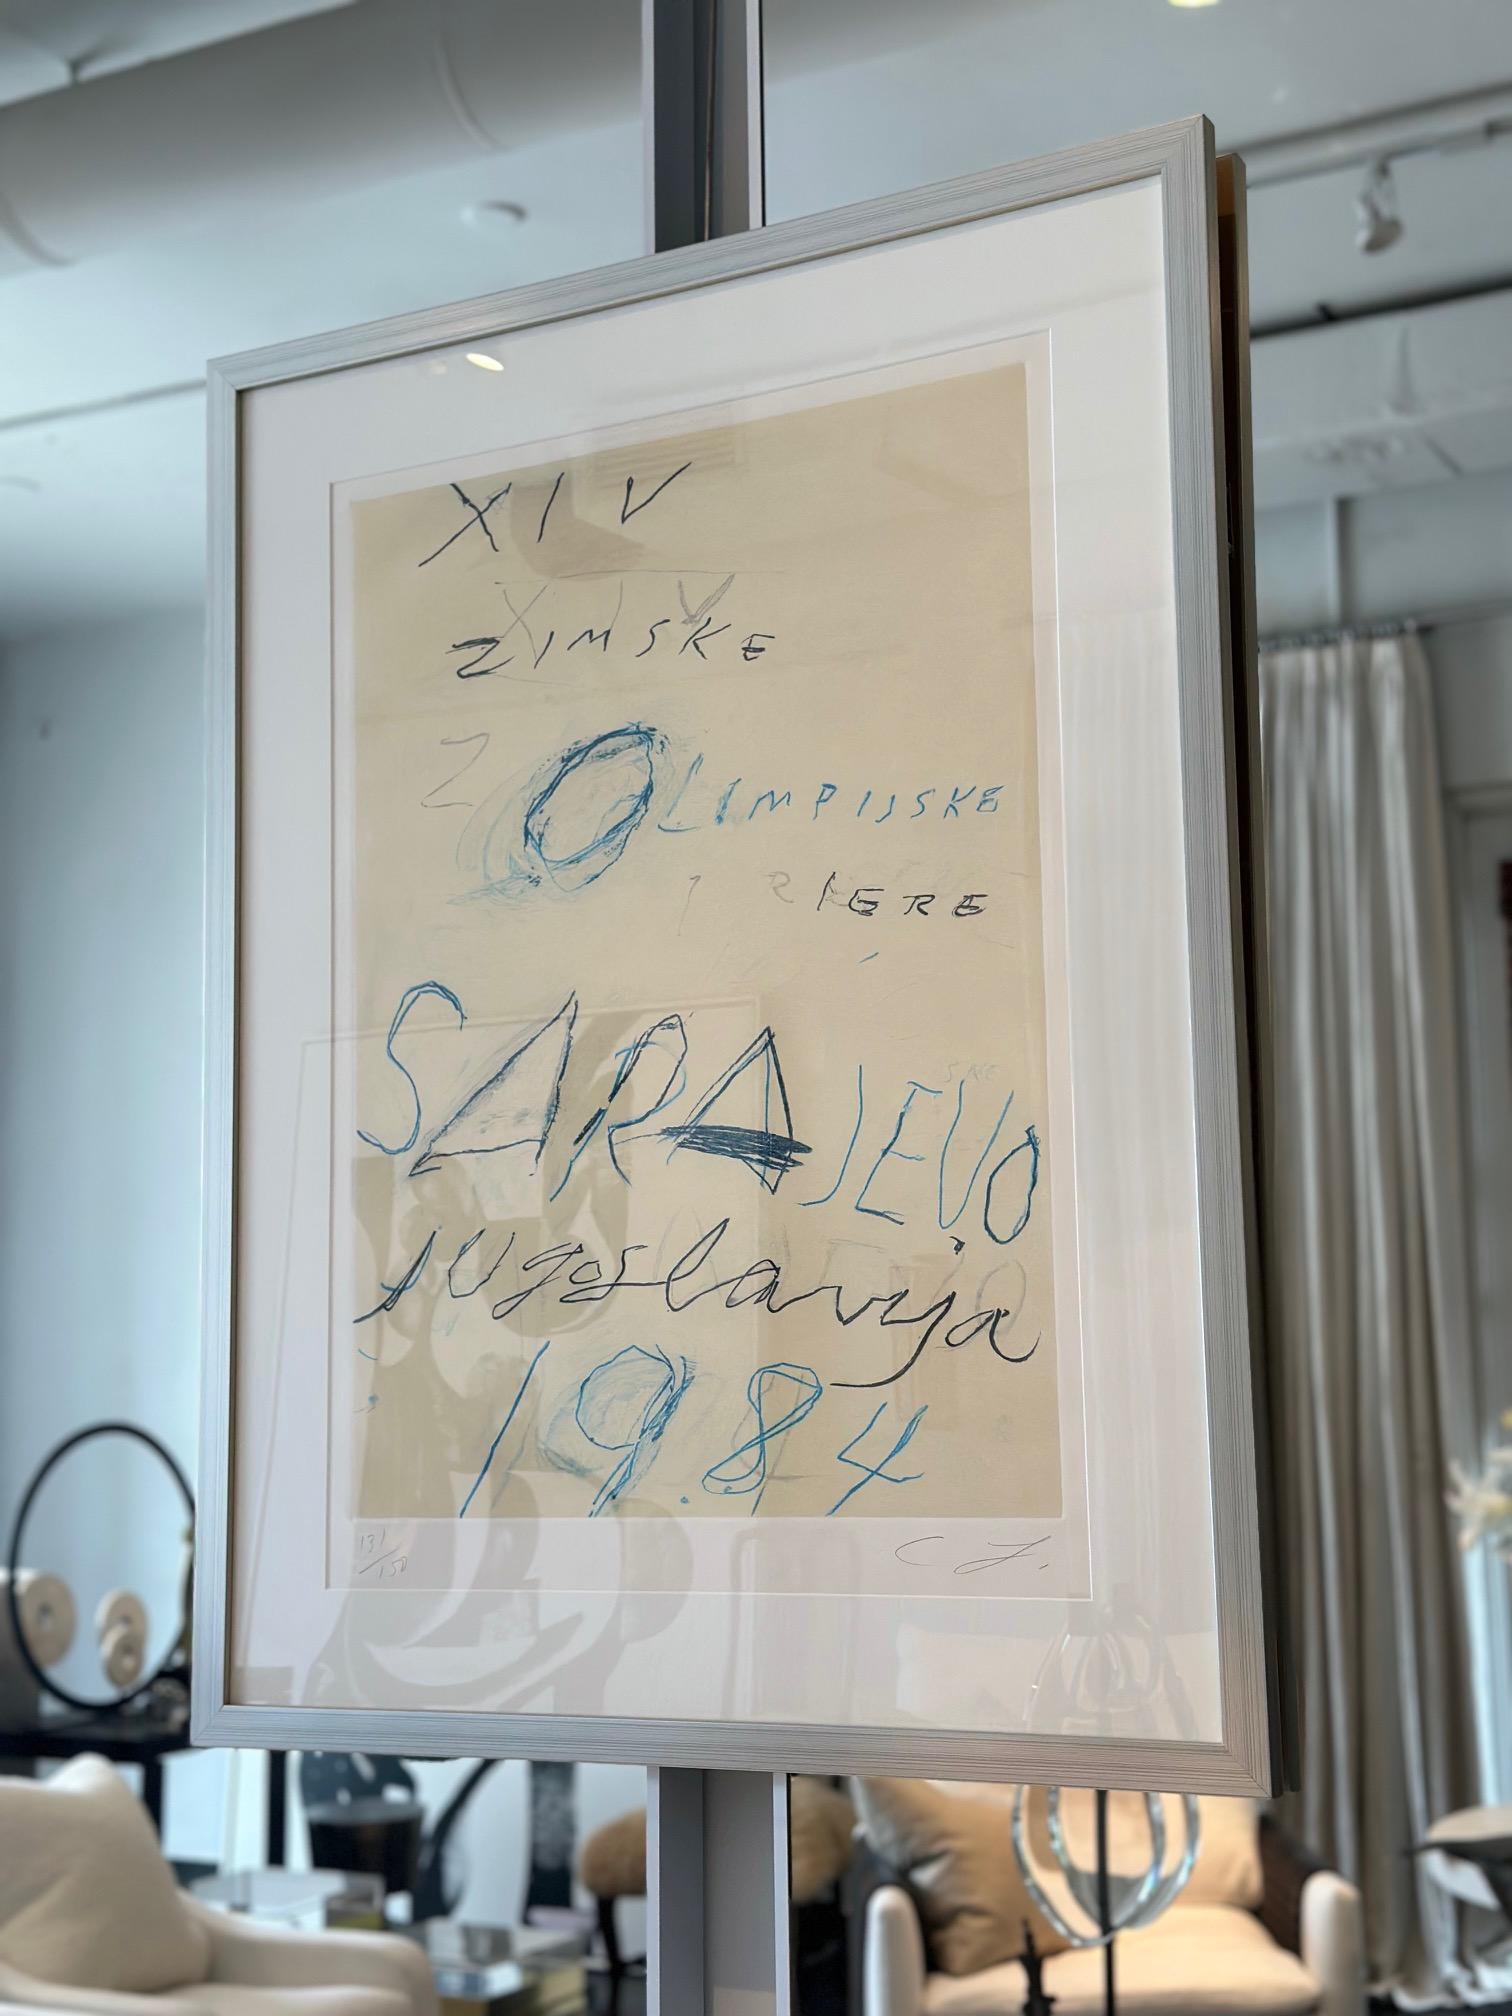 Made for the 1984 Winter Olympic Games. Cy Twombly used the same characteristic scrawl that he had previously used on 1976 series. Lithograph numbered/ signed